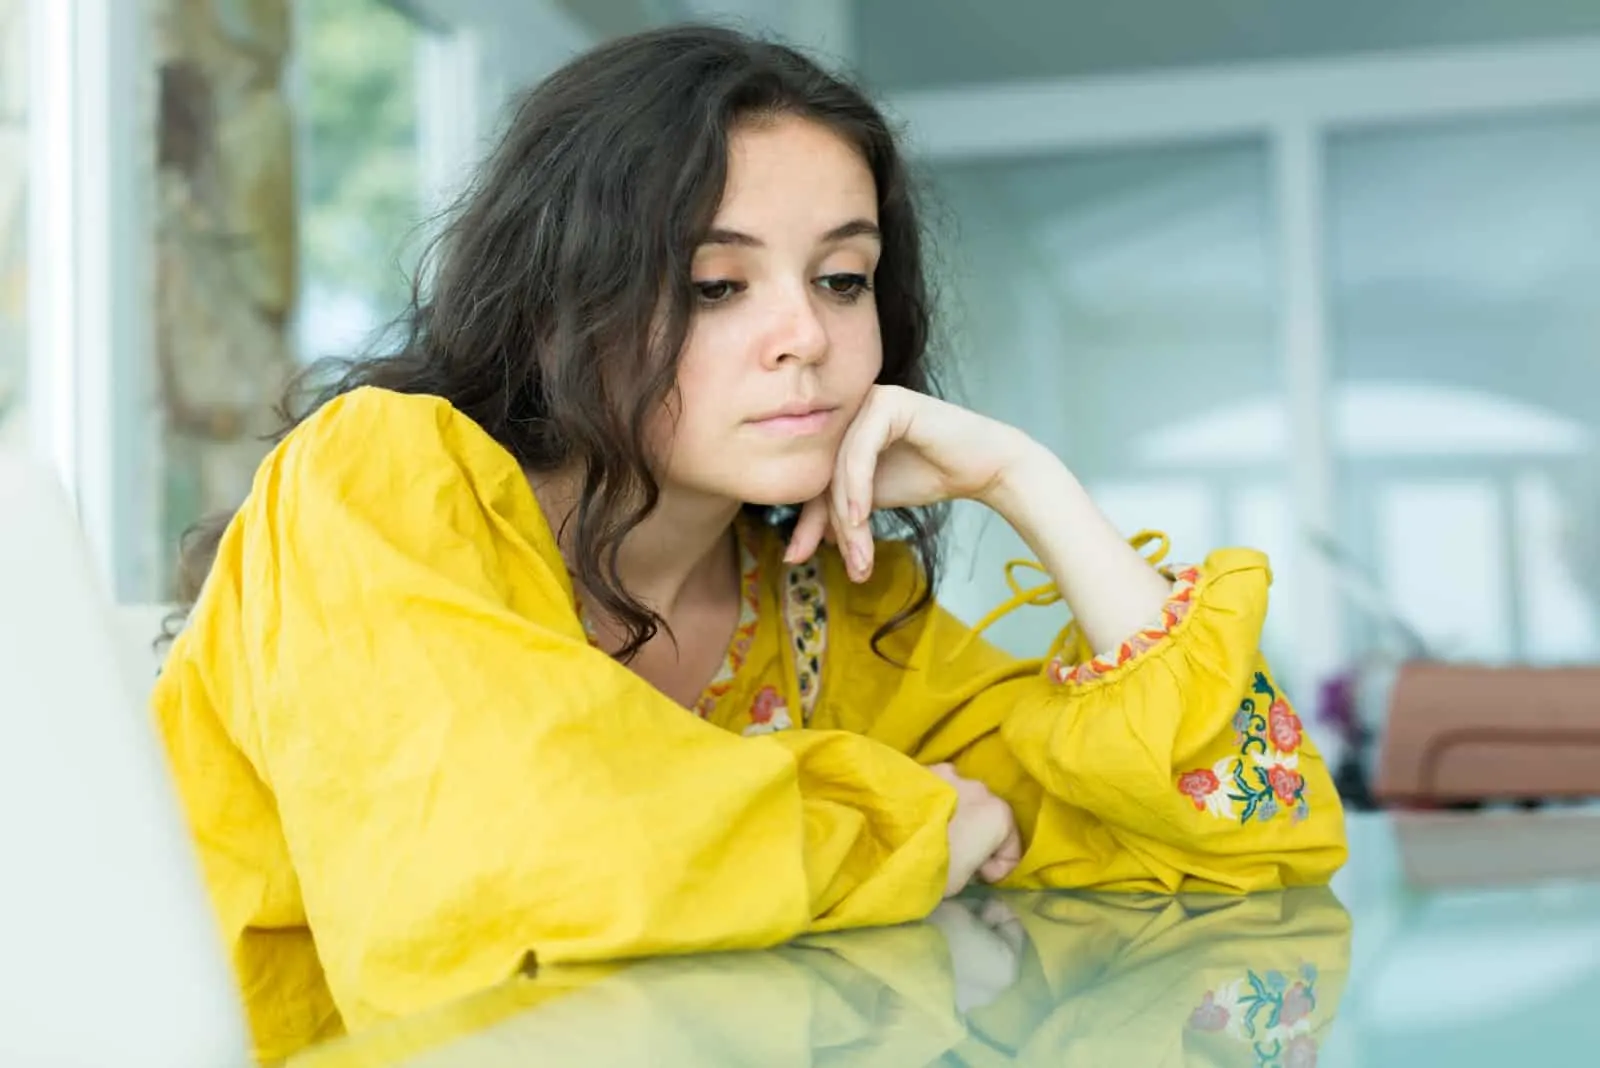 sad woman in yellow blouse leaning on table